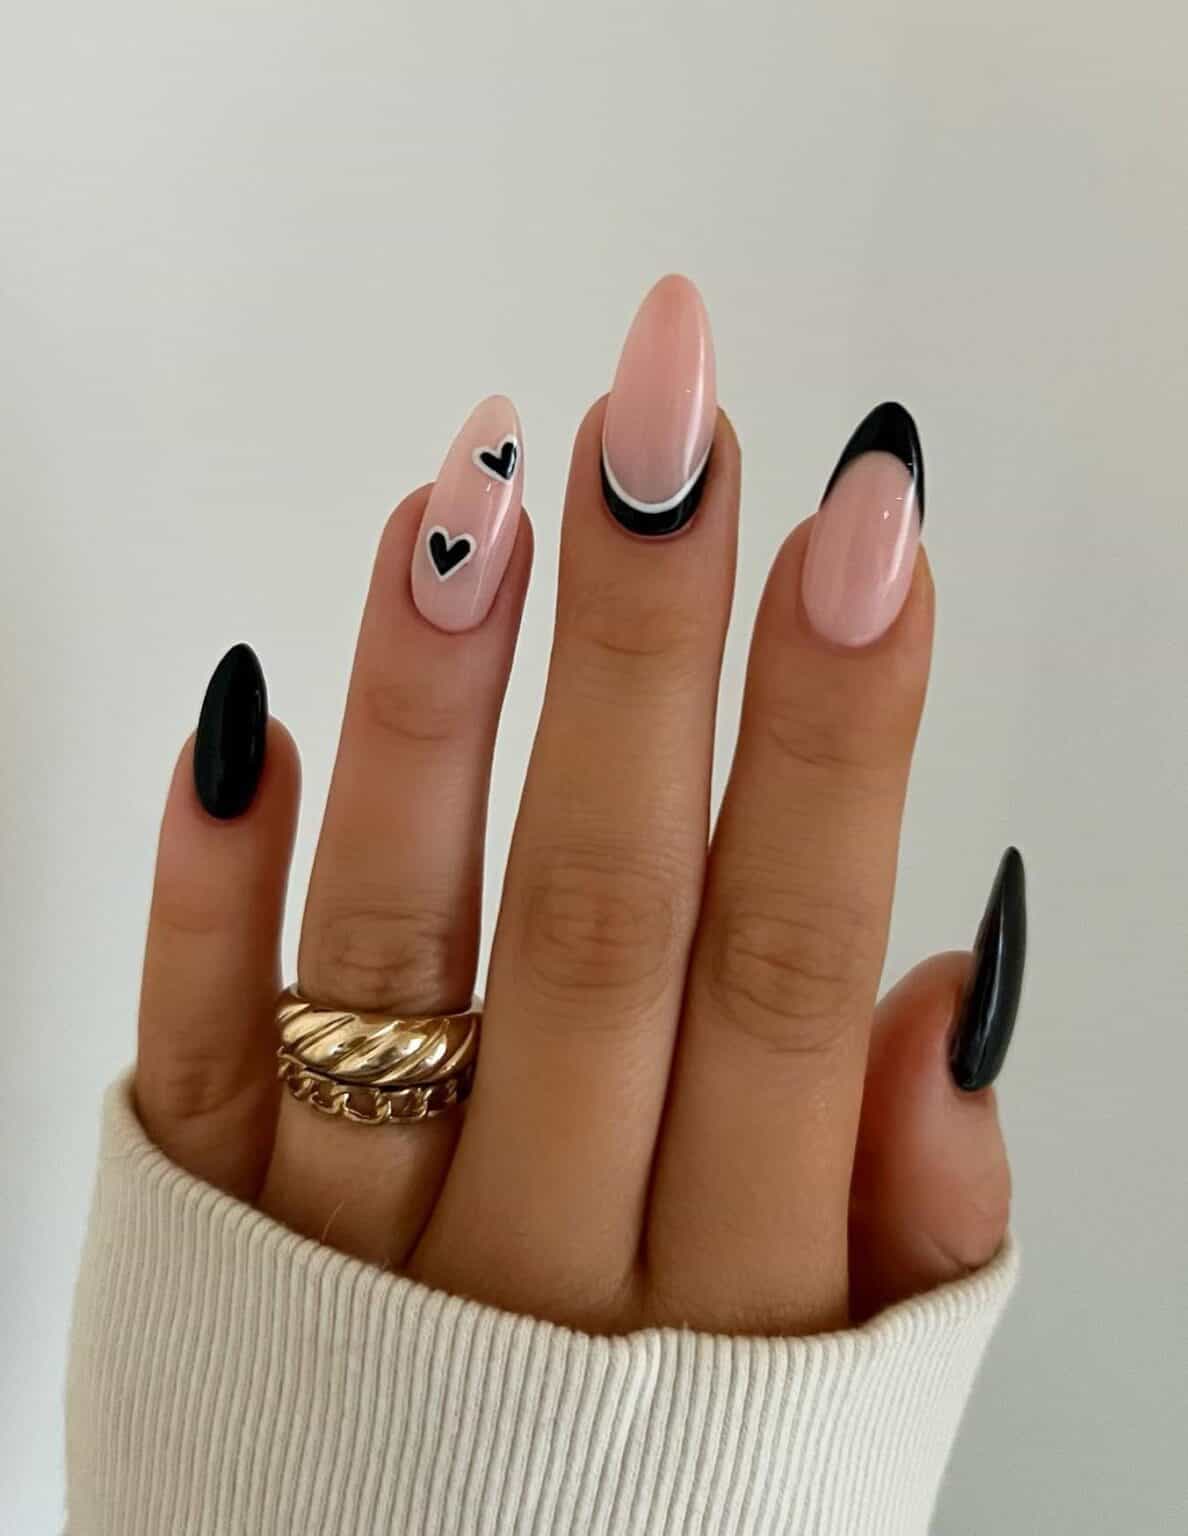 Black Nail Designs | Pink Nude Nails w/ Black French Tips + Hearts